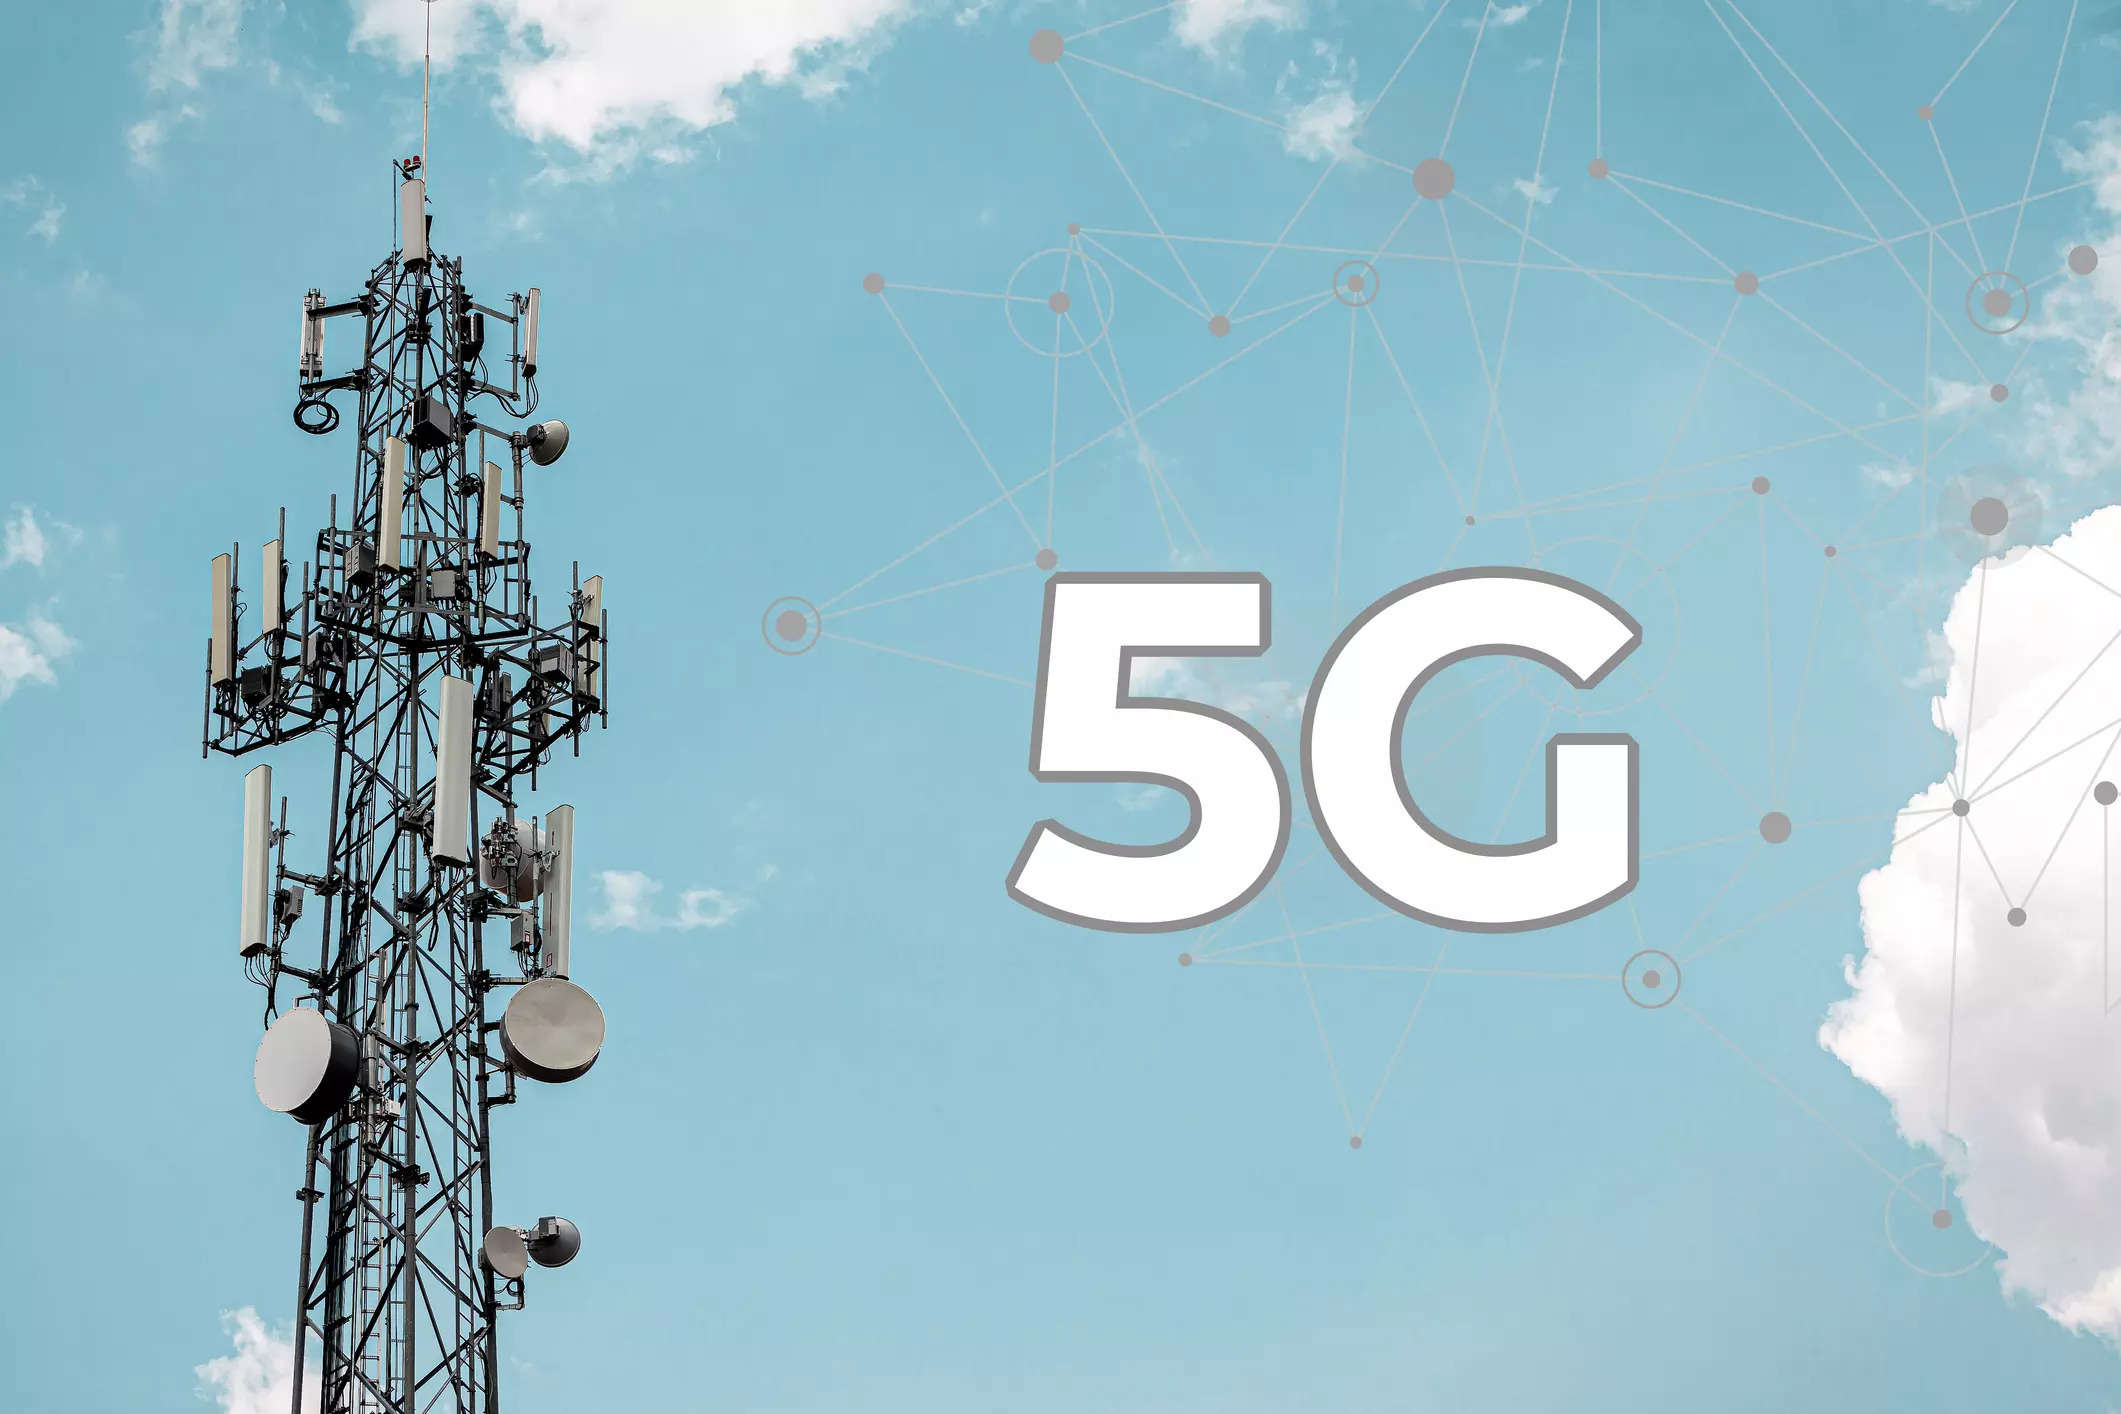 DoT dictates to administratively allocate spectrum to facilitate the back door entry of big tech companies to 5G networks: Jio, Airtel, Vi